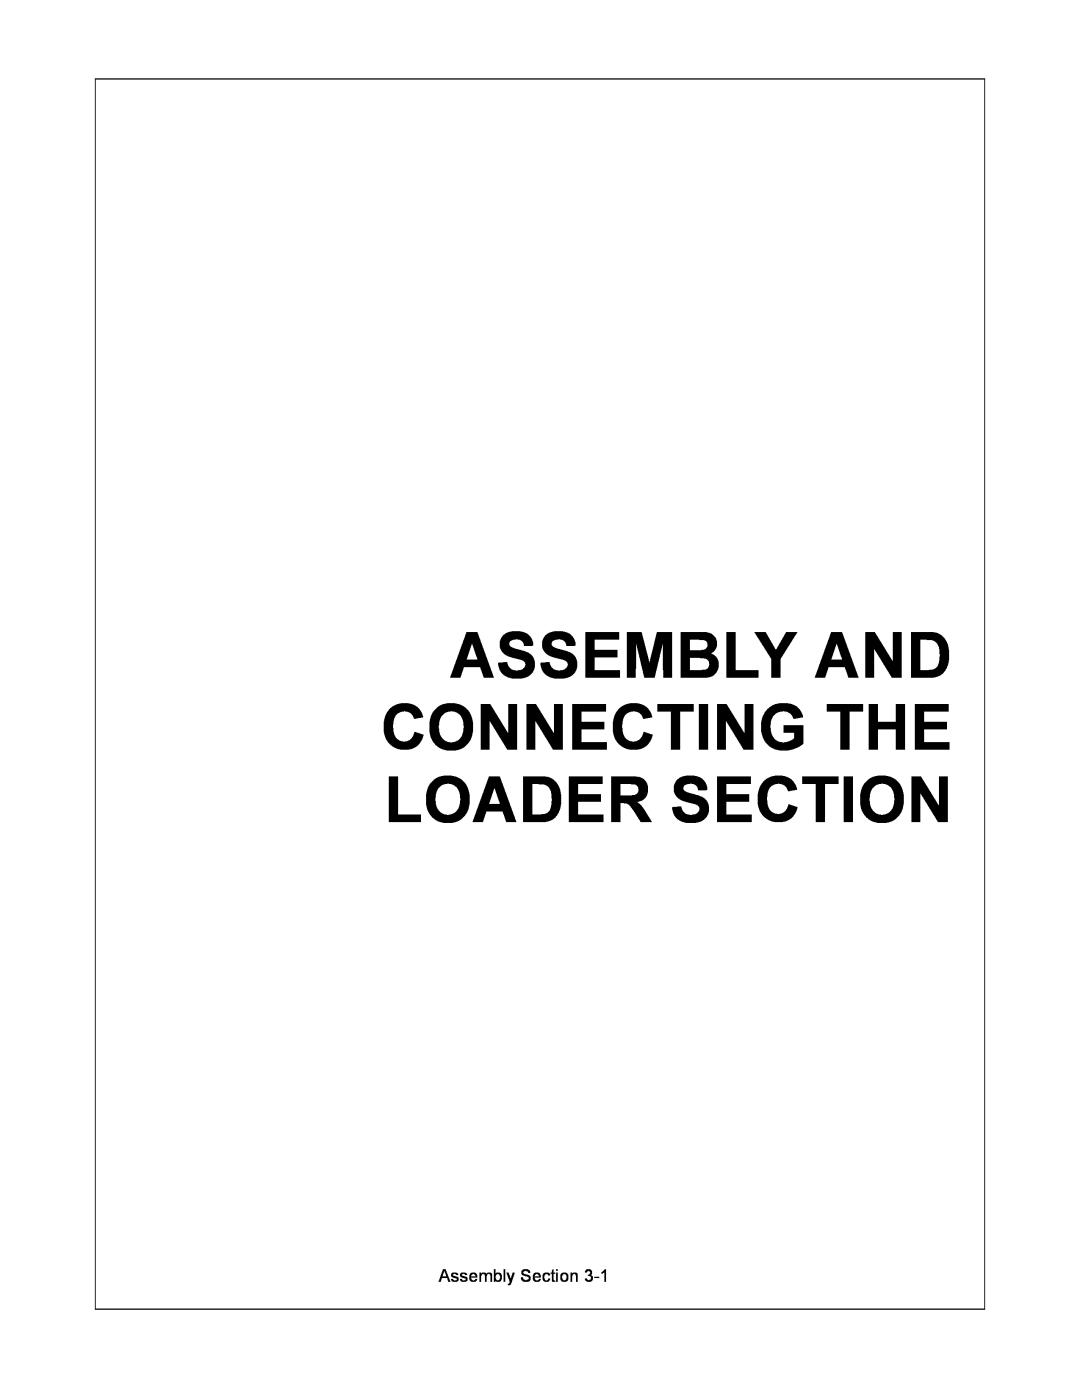 Alamo 6212 manual Assembly And Connecting The Loader Section, Assembly Section 